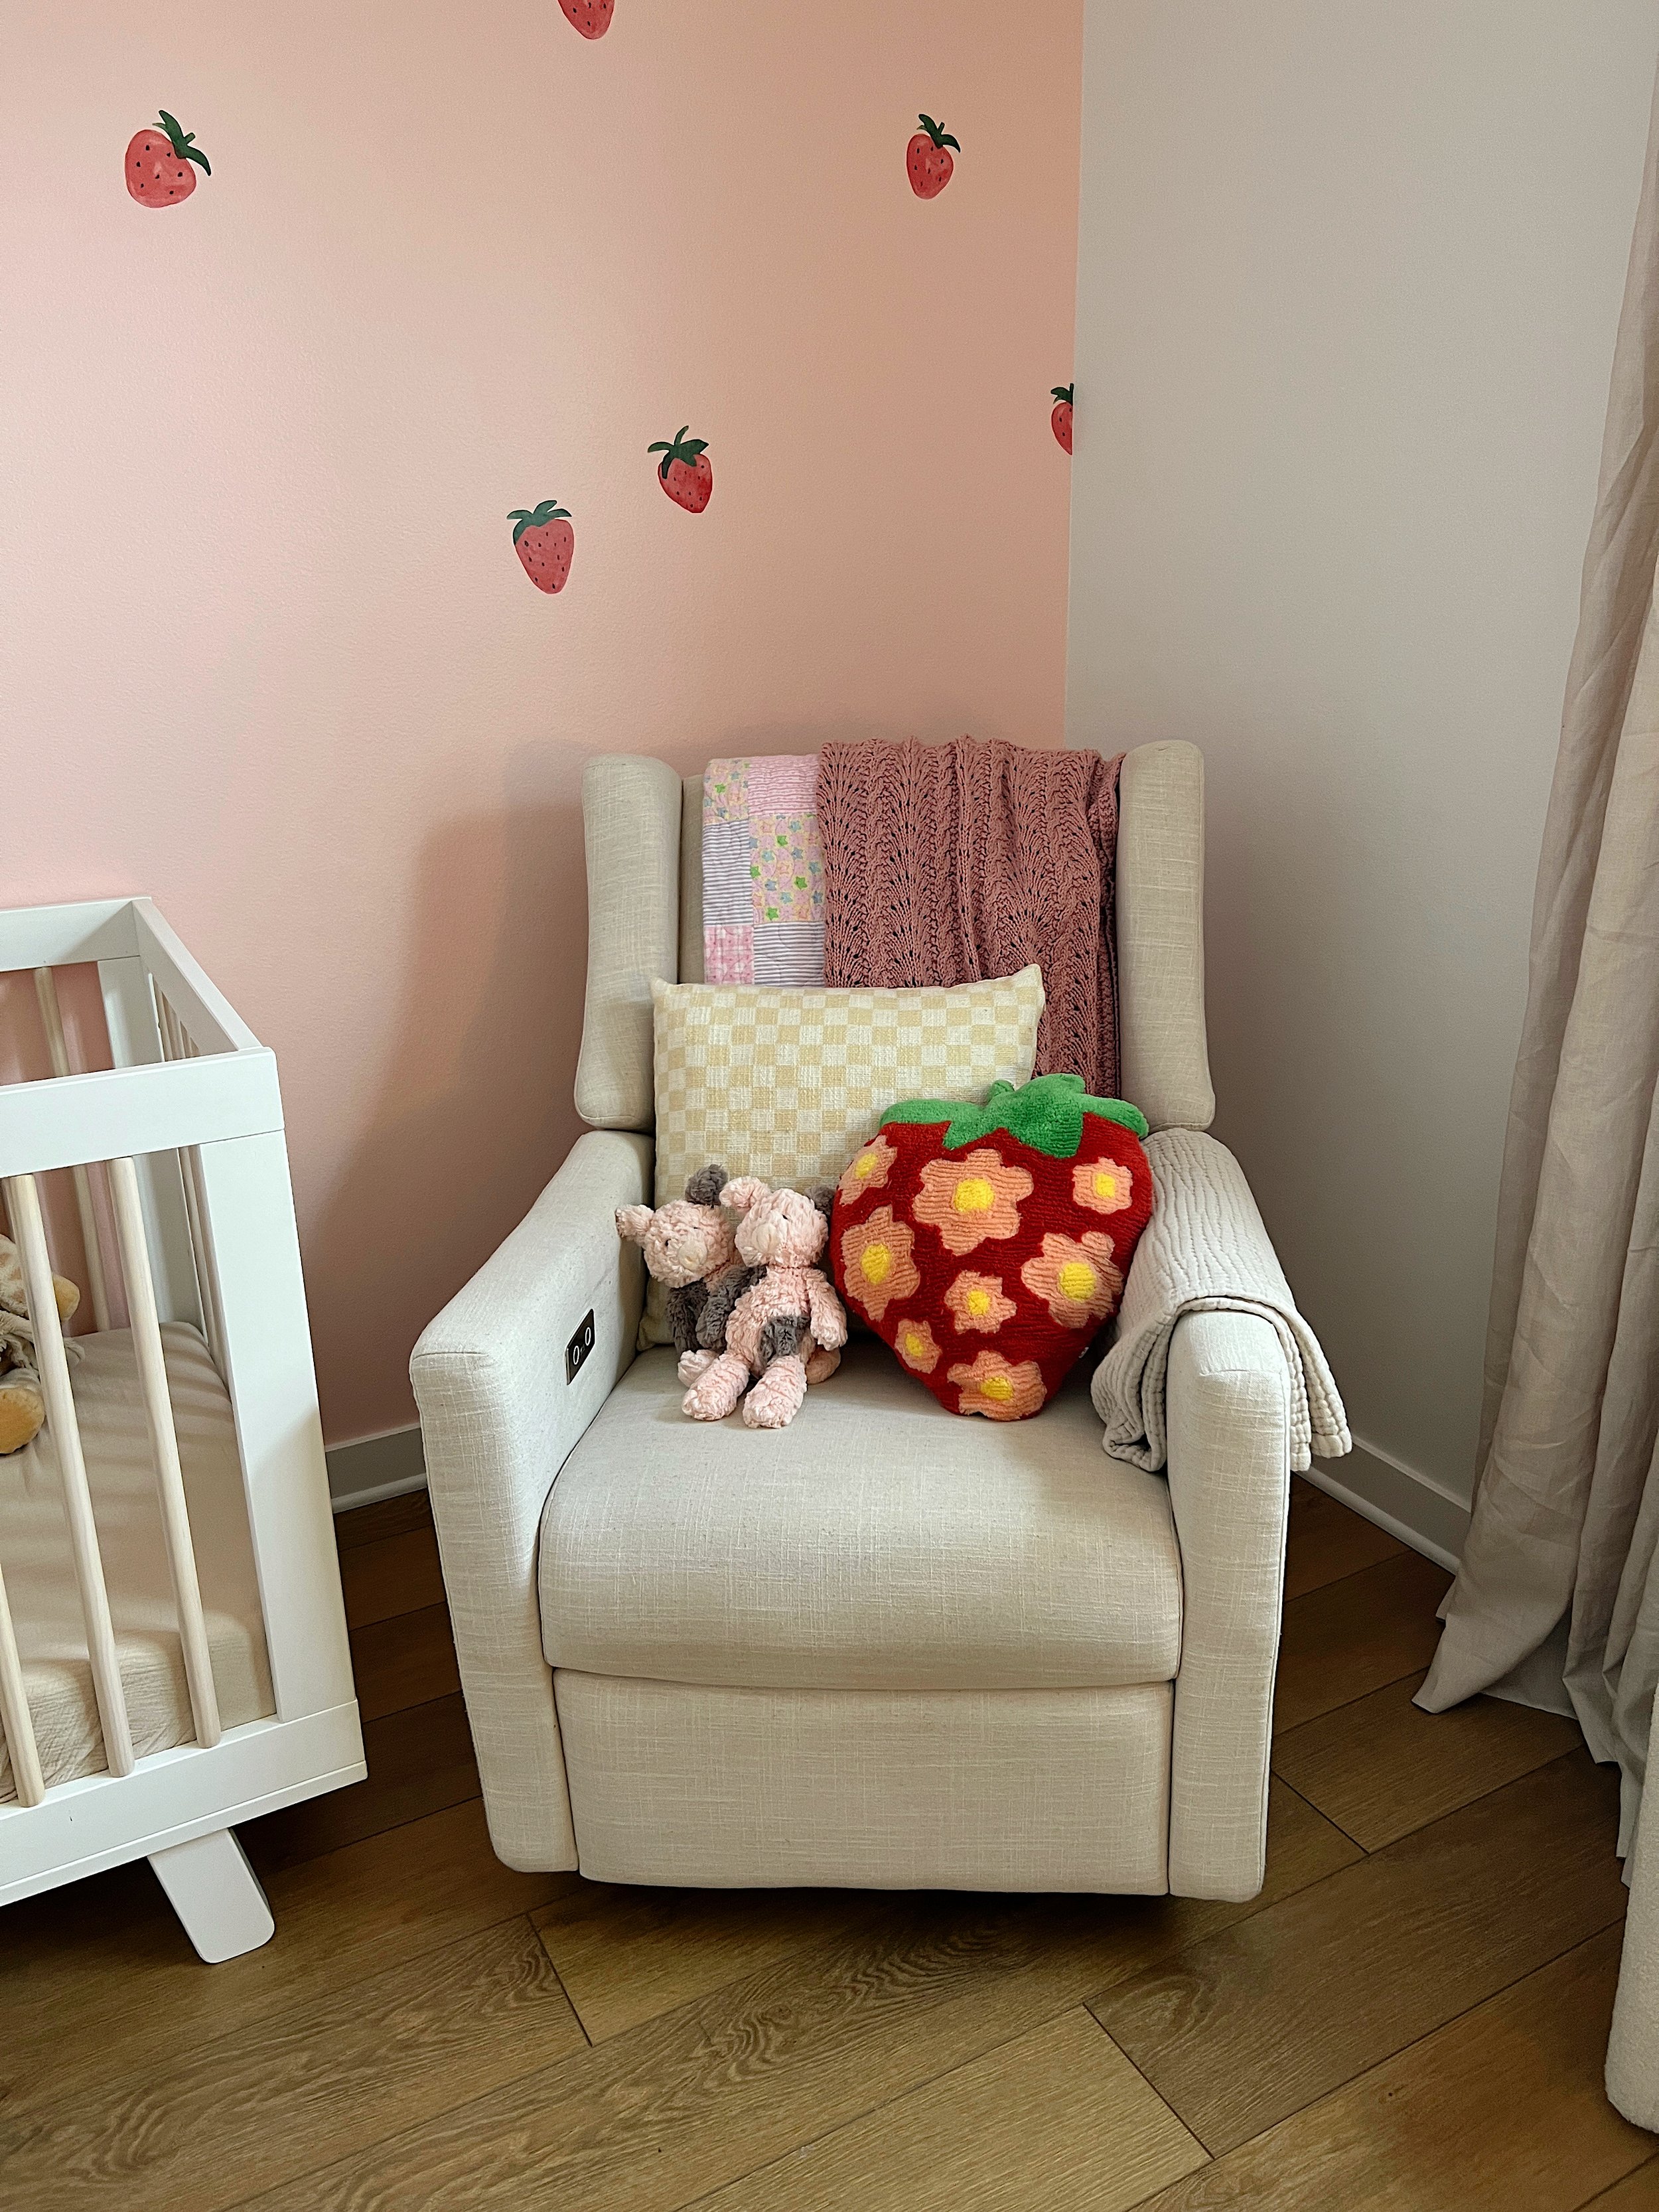 Taya's Strawberry Toddler Room - Pink Elephant by Bher paint color, strawberry room, toddler bedroomr, crib - bresheppard.com.JPG